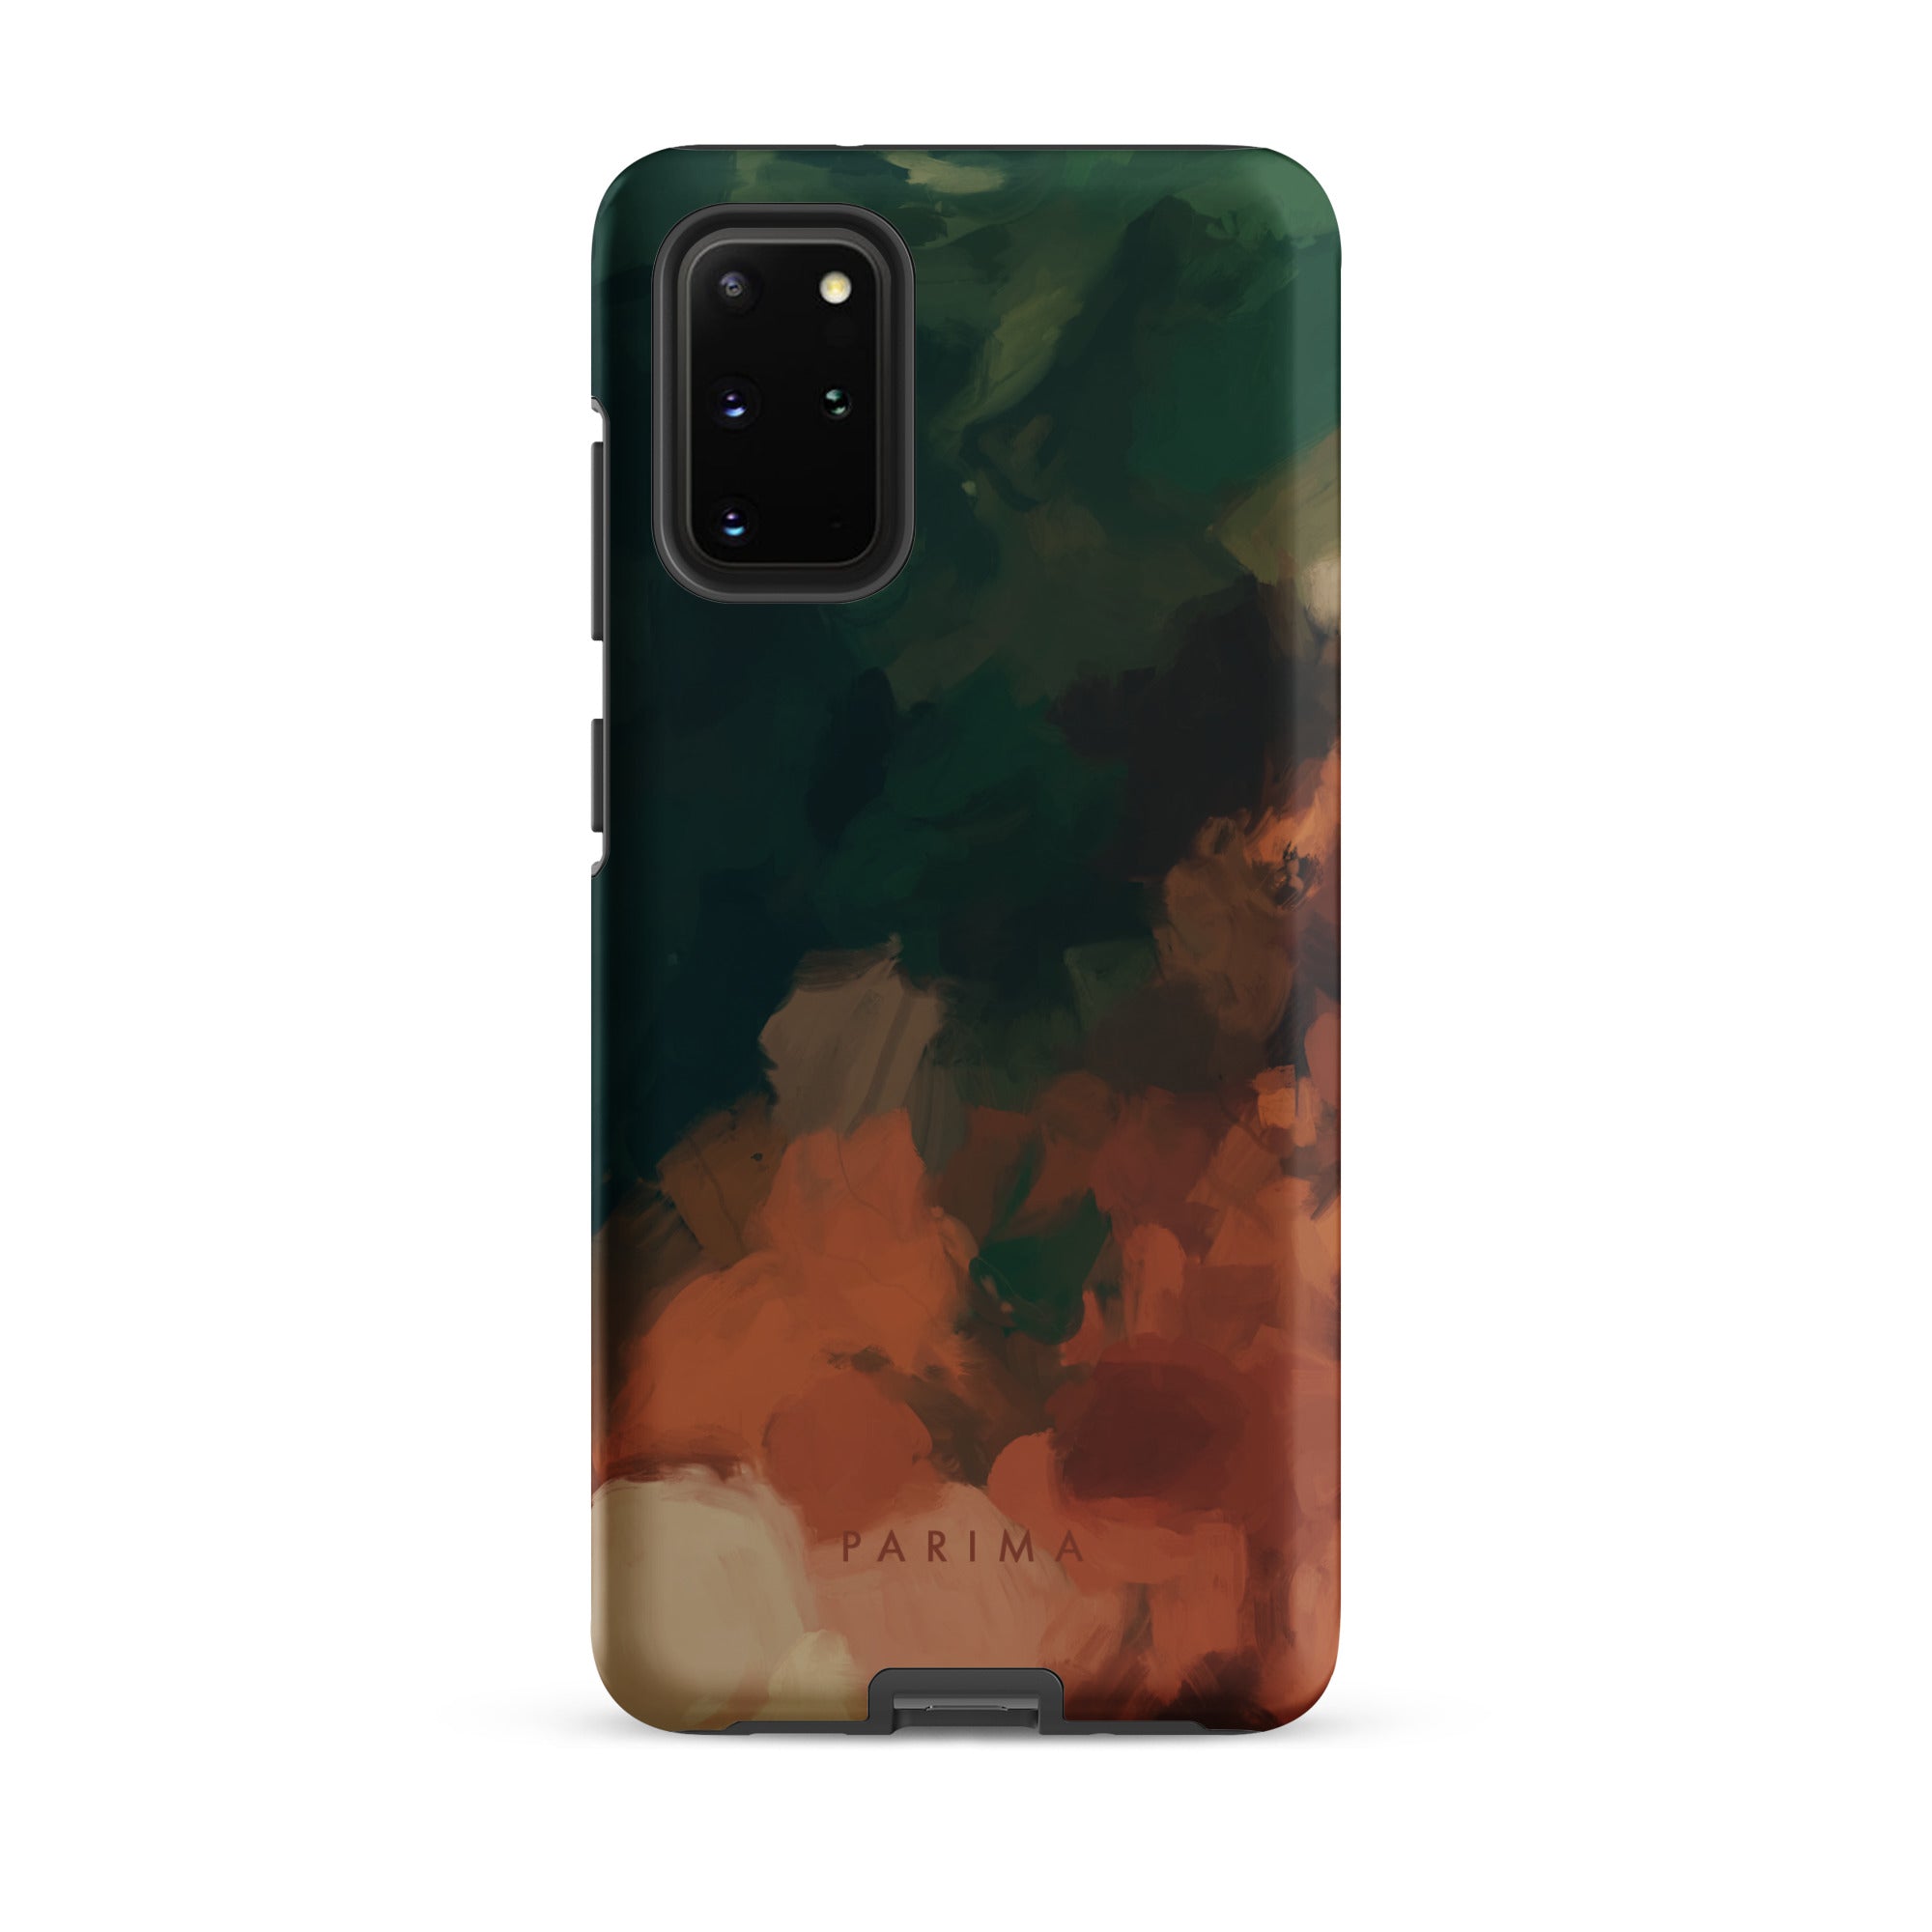 Cedar, green and brown abstract art on Samsung Galaxy S20 Plus tough case by Parima Studio